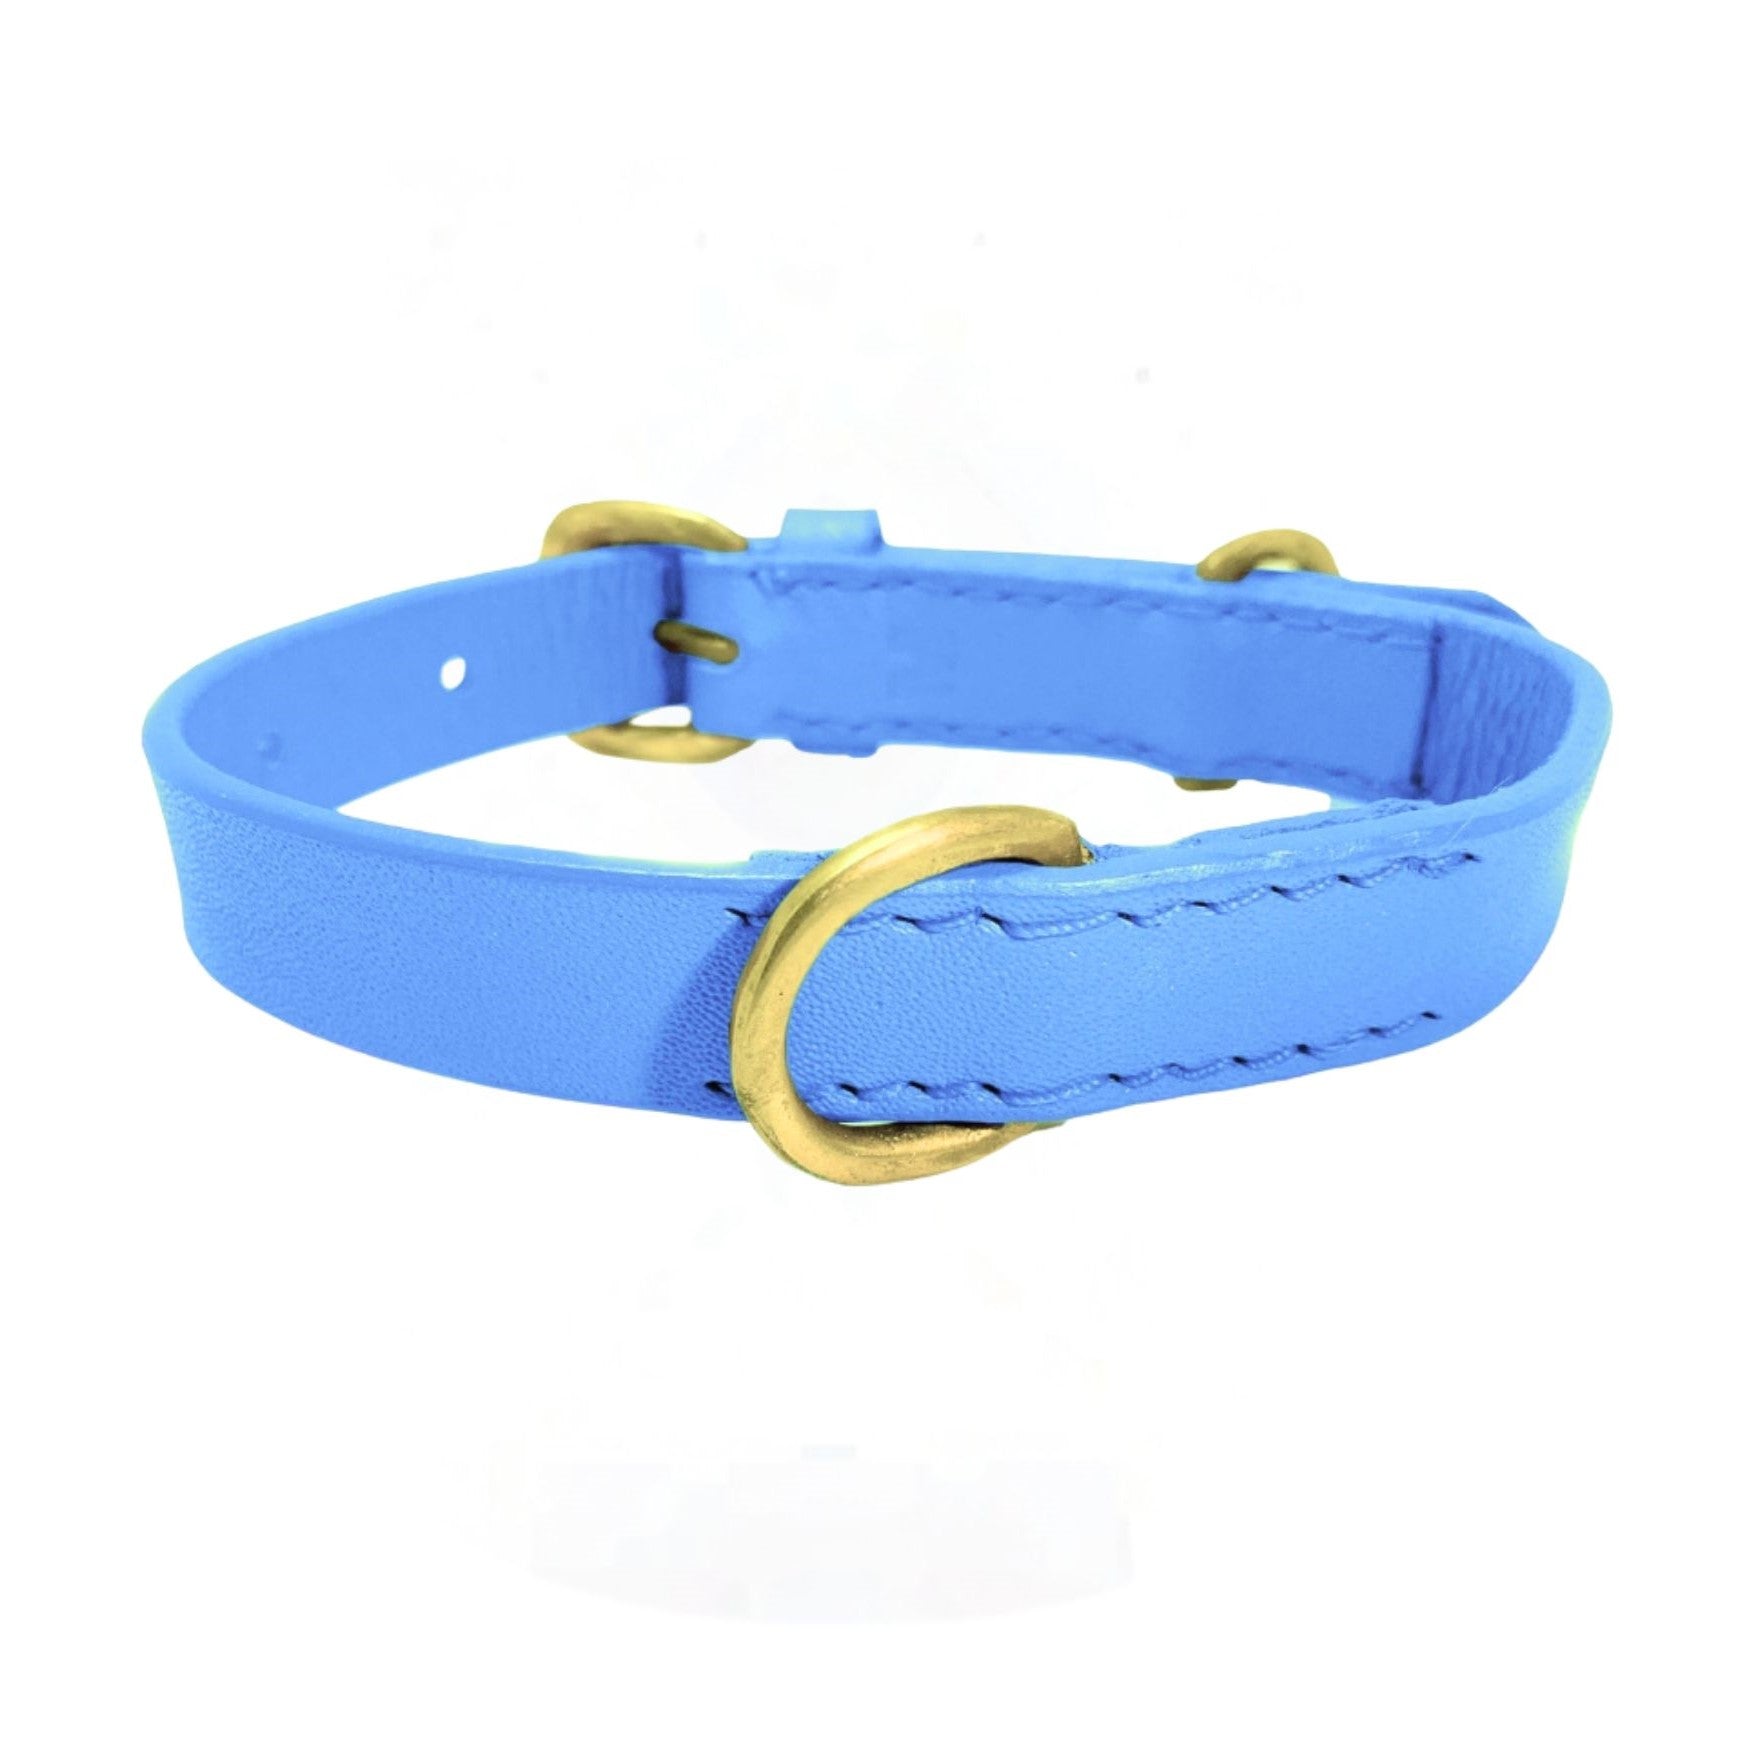 A vibrant blue Georgie Paws leather collar with golden hardware, showcasing a classic buckle closure and clean stitch detailing, isolated on a white background.